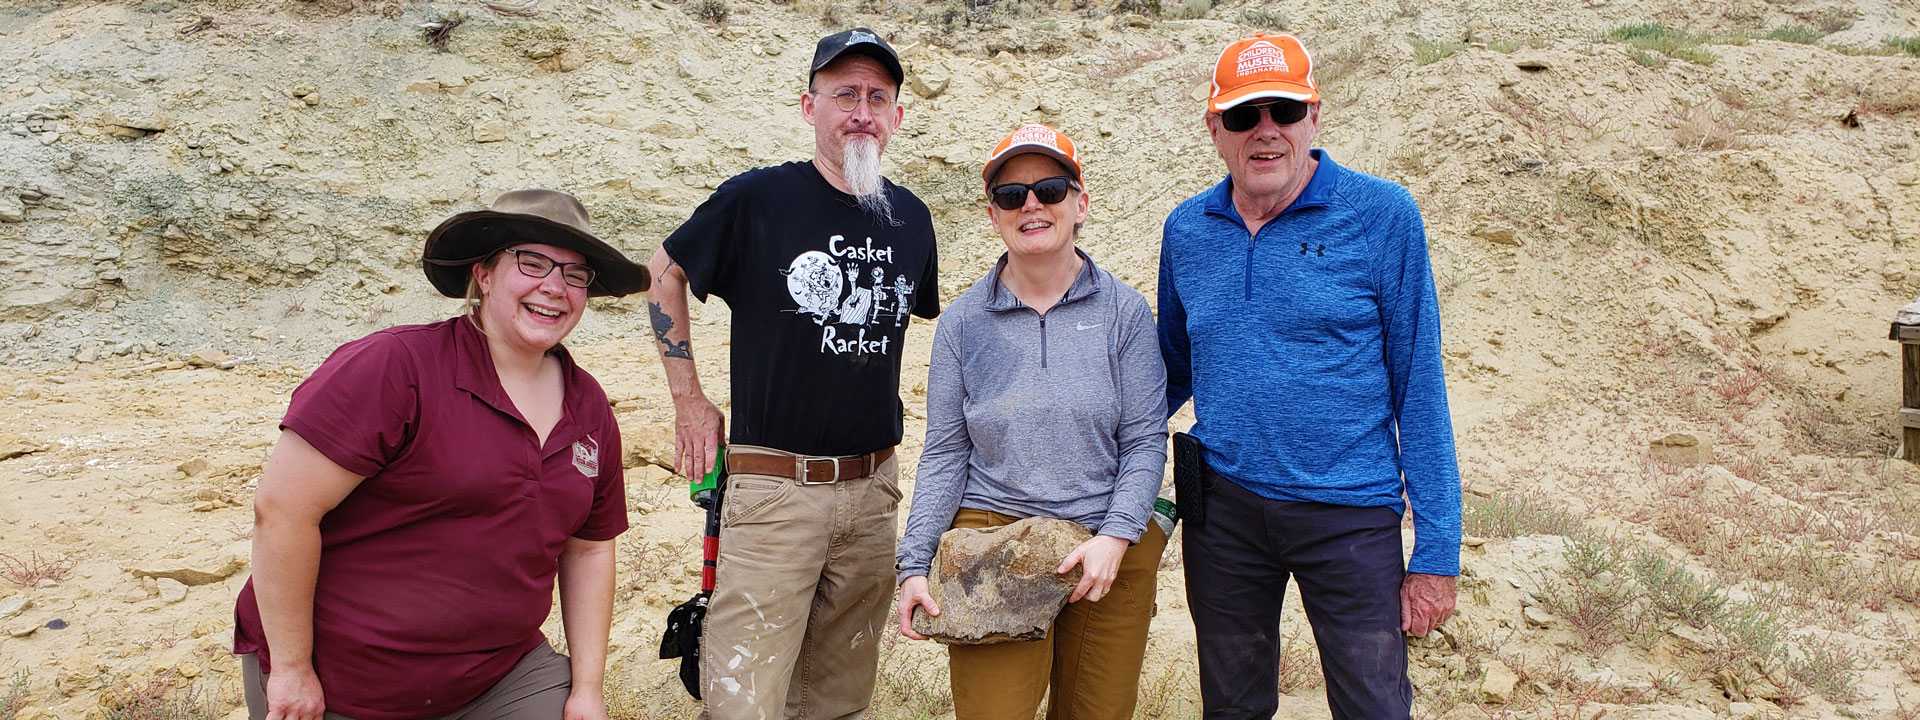 Steven and Susan Haines posing with two scientists at the Jurassic Mile dig site in Wyoming. Susan is holding a fossil.